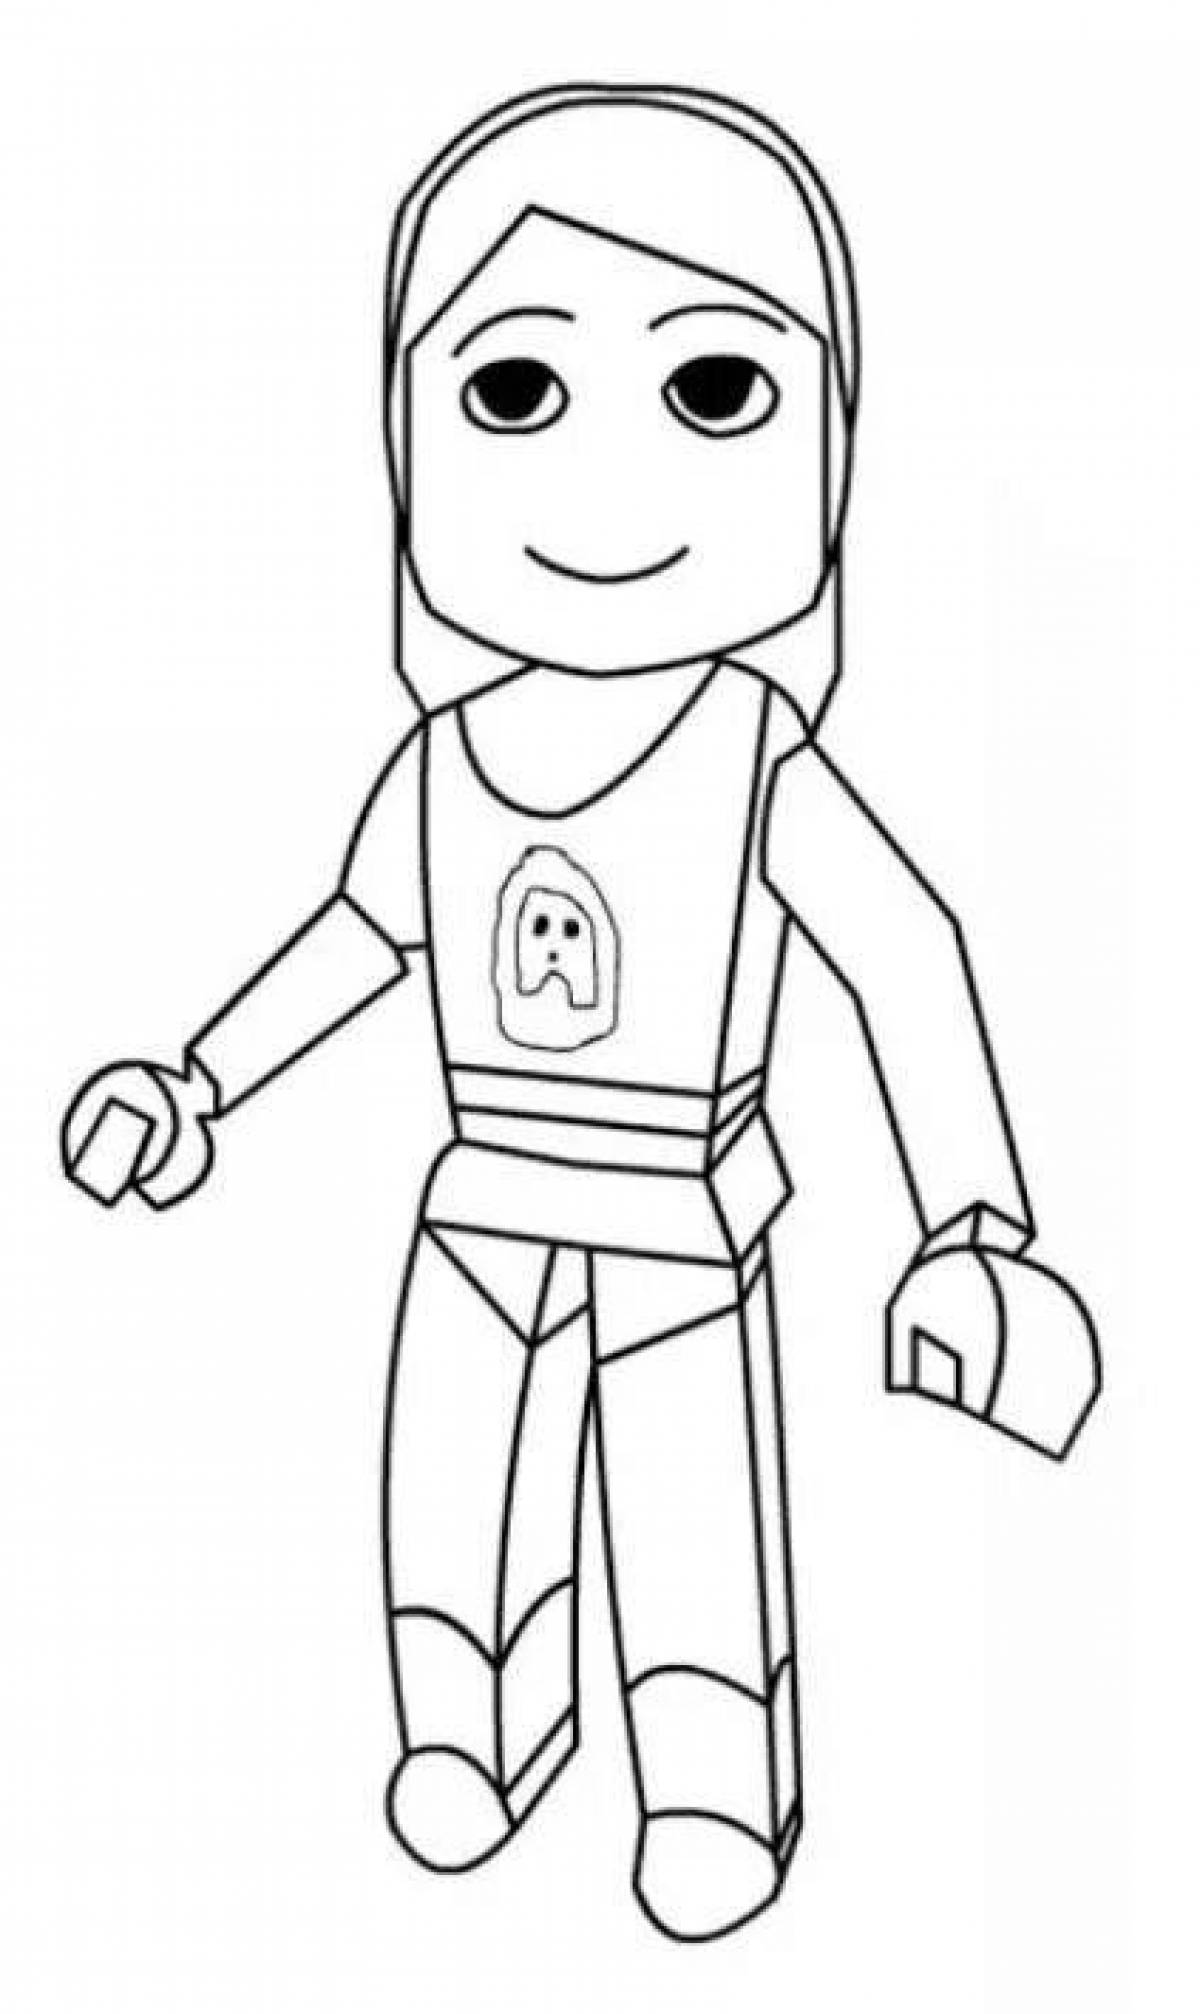 Coloring Pages Roblox characters (29 pcs) - download or print for free ...